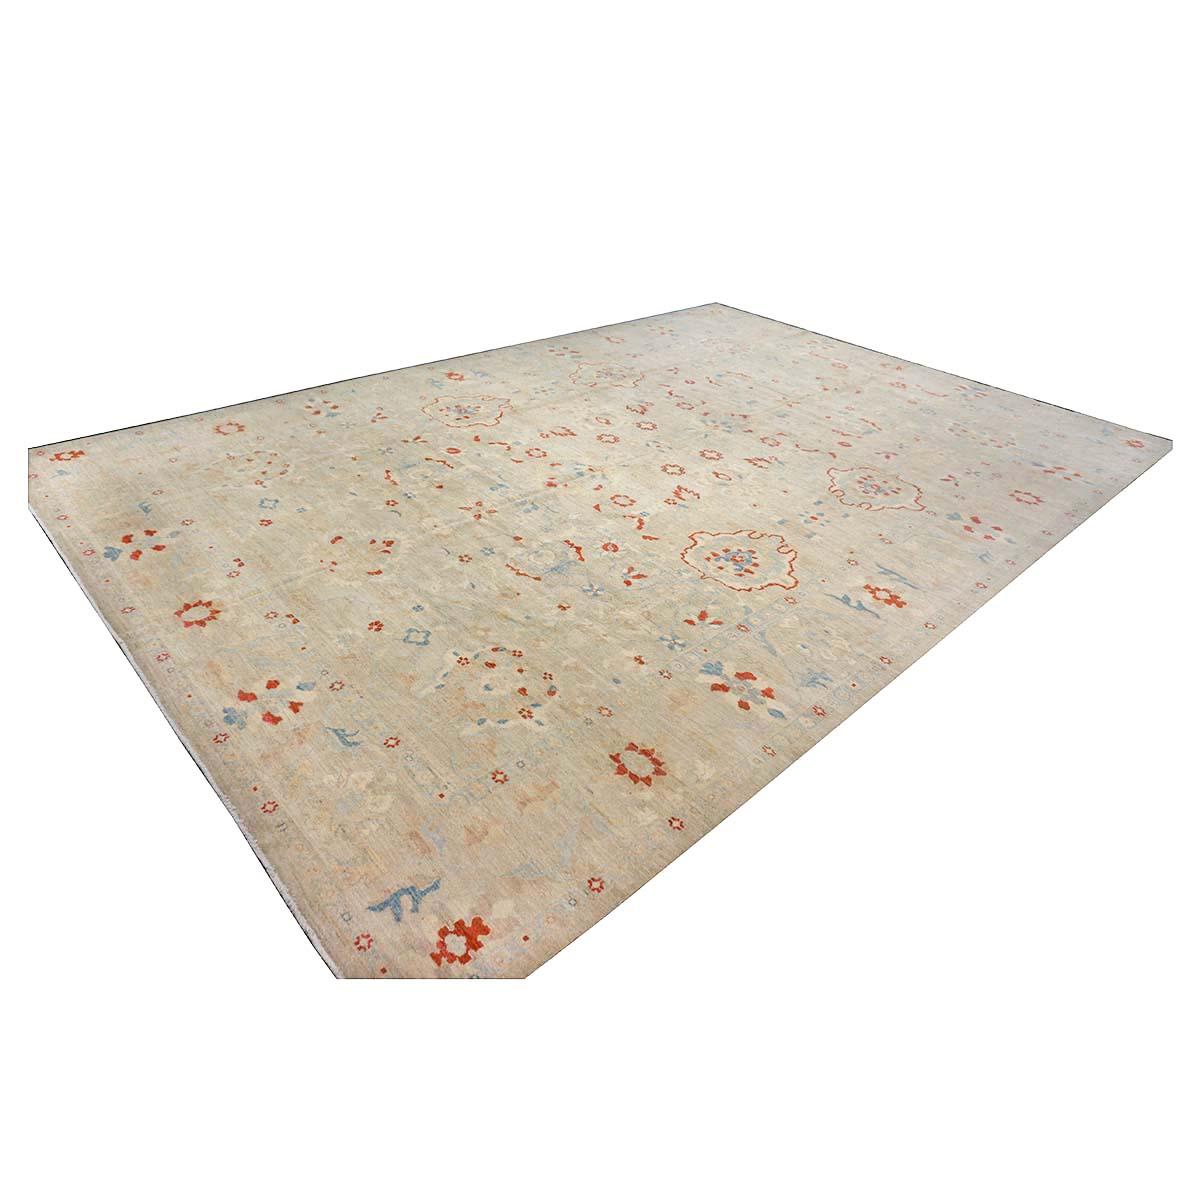 Hand-Woven 21st Century Sultanabad Master 12x17 Ivory, Red, & Blue Handmade Area Rug For Sale